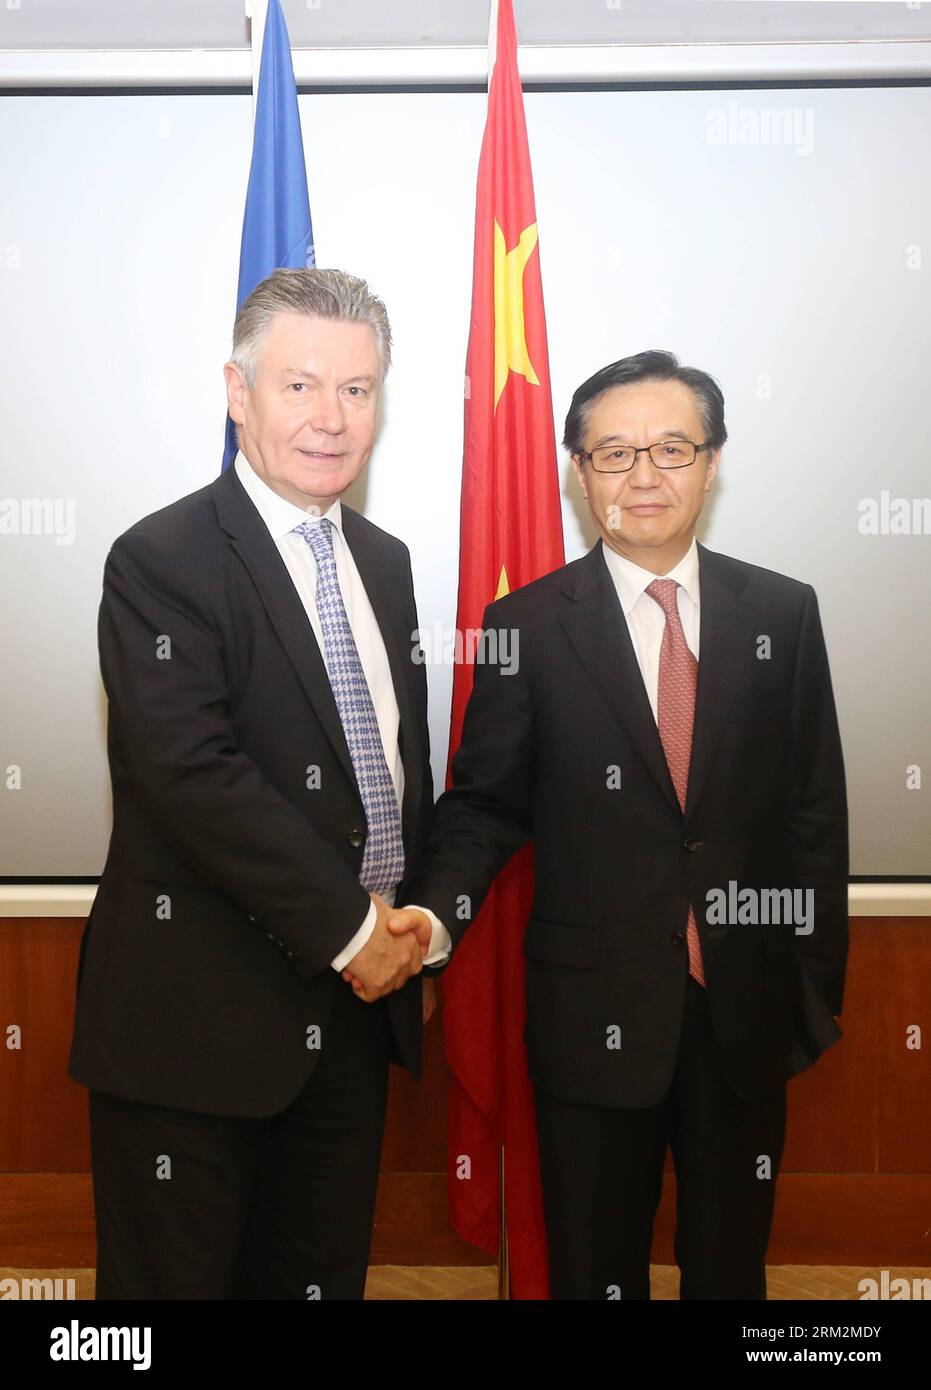 Bildnummer: 59880481  Datum: 21.06.2013  Copyright: imago/Xinhua (130621) -- BEIJING, June 21, 2013 (Xinhua) -- Gao Hucheng (R), Chinese minister of commerce, shakes hands with European Union(EU) Trade Commissioner Karel De Gucht before the 27th China-EU Economic and Trade Joint Committee meeting in Beijing, capital of China, June 21, 2013. The meeting was held here on Friday. (Xinhua/Xing Guangli) (yxb) CHINA-EU-ECONOMIC AND TRADE JOINT COMMITTEE-MEETING (CN) PUBLICATIONxNOTxINxCHN People Politik x0x xkg 2013 hoch      59880481 Date 21 06 2013 Copyright Imago XINHUA  Beijing June 21 2013 XINH Stock Photo